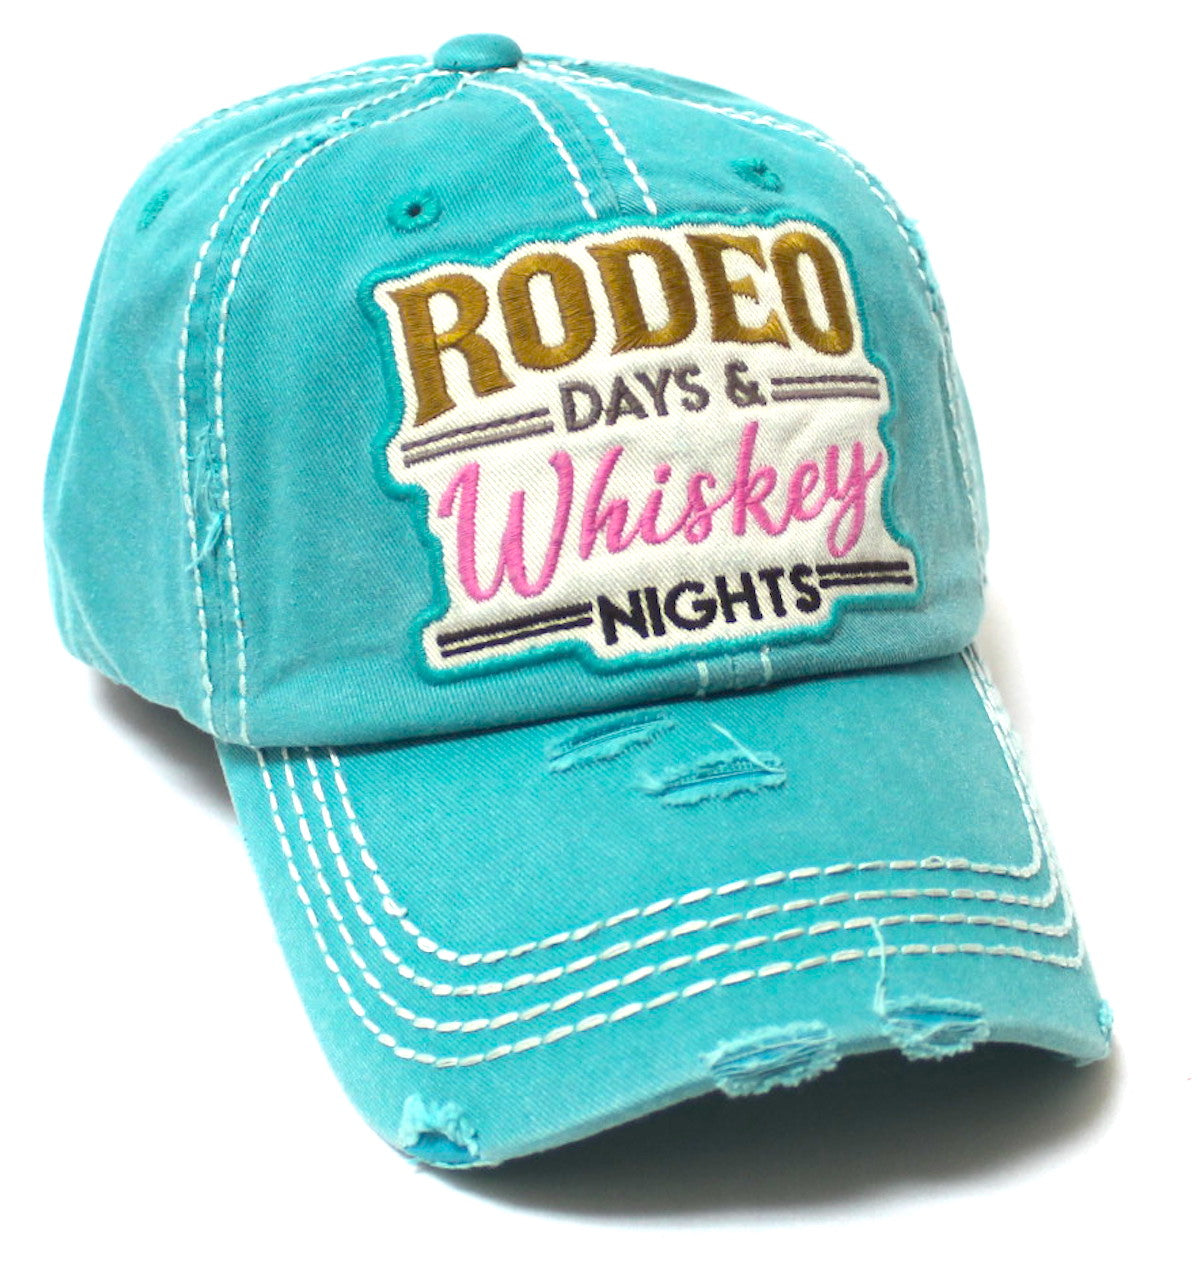 Rodeo Days Whiskey Nights Baseball Cap - Distressed Hats for Women - Summer Style Accessory in California Blue - Caps 'N Vintage 